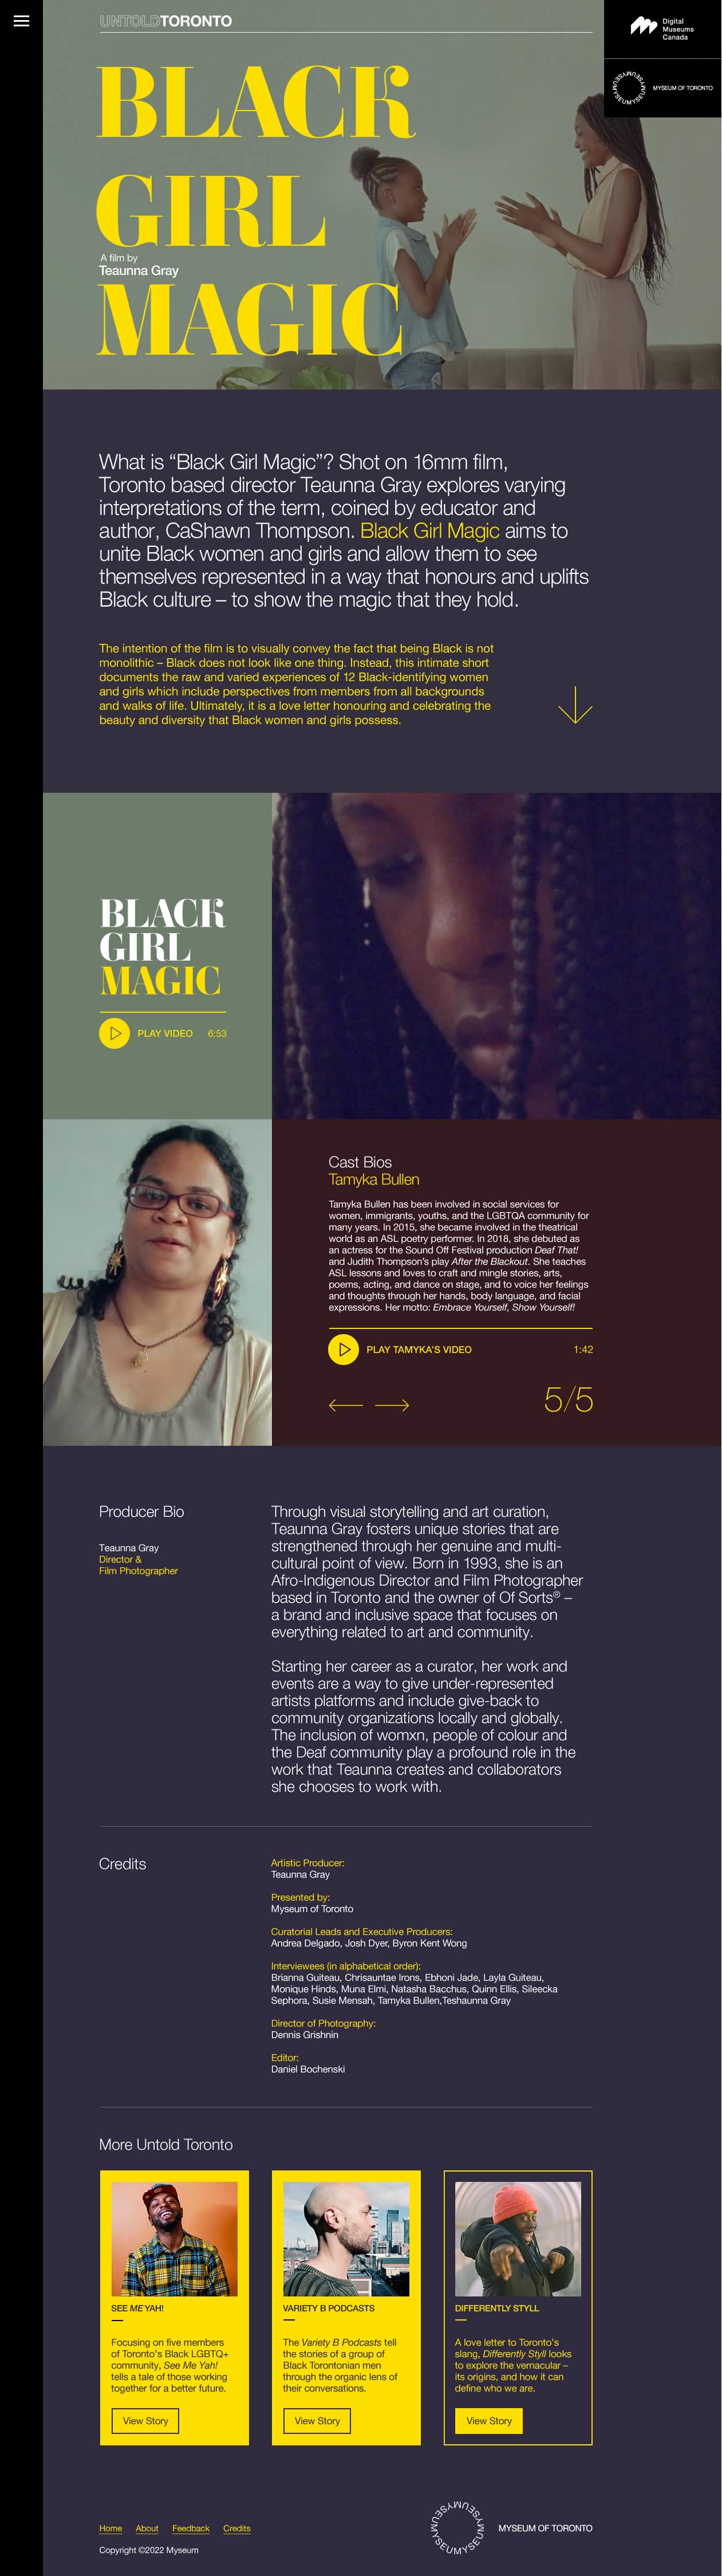 Capture of the full 'Black Girl Magic' page from the Untold Toronto microsite